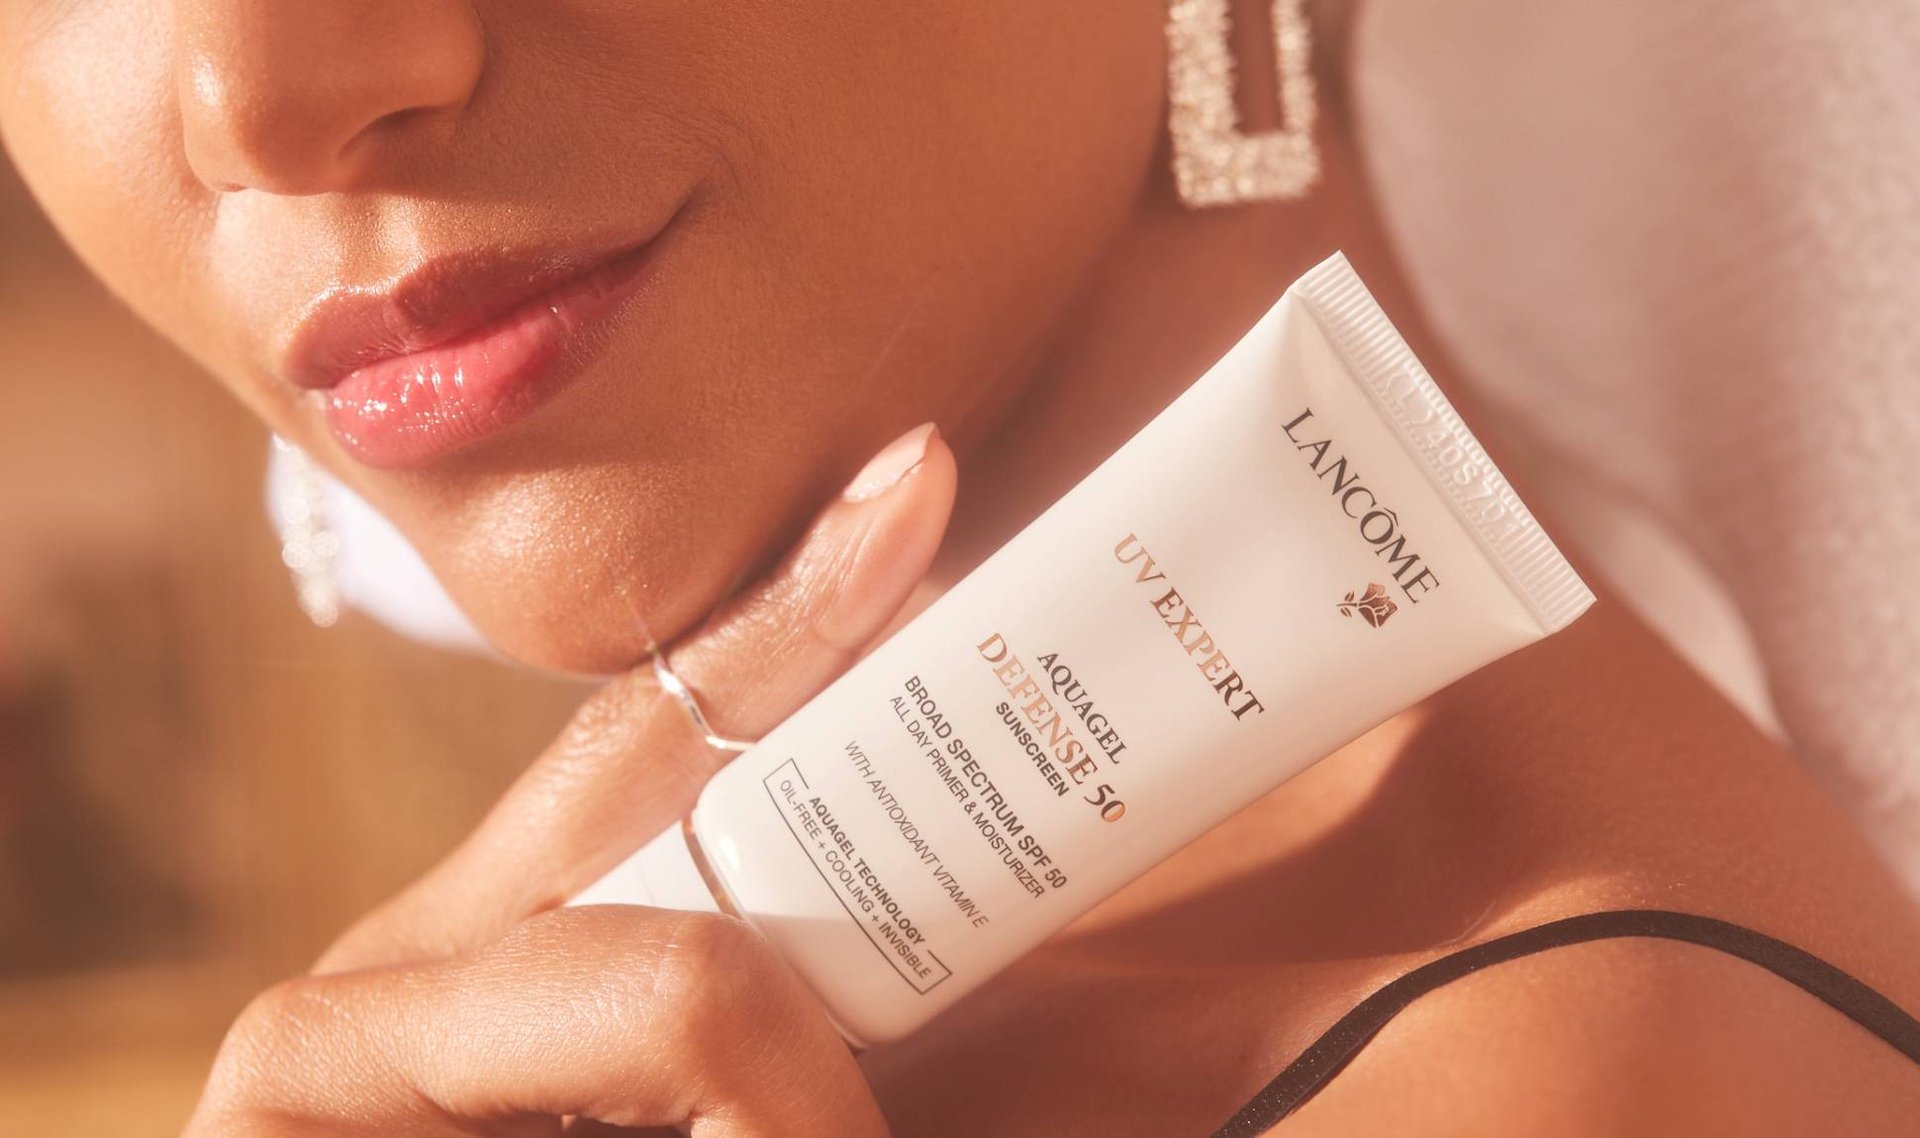 This All-In-One Water-Gel Sunscreen Is a Must-Have in My Summer Beauty Routine